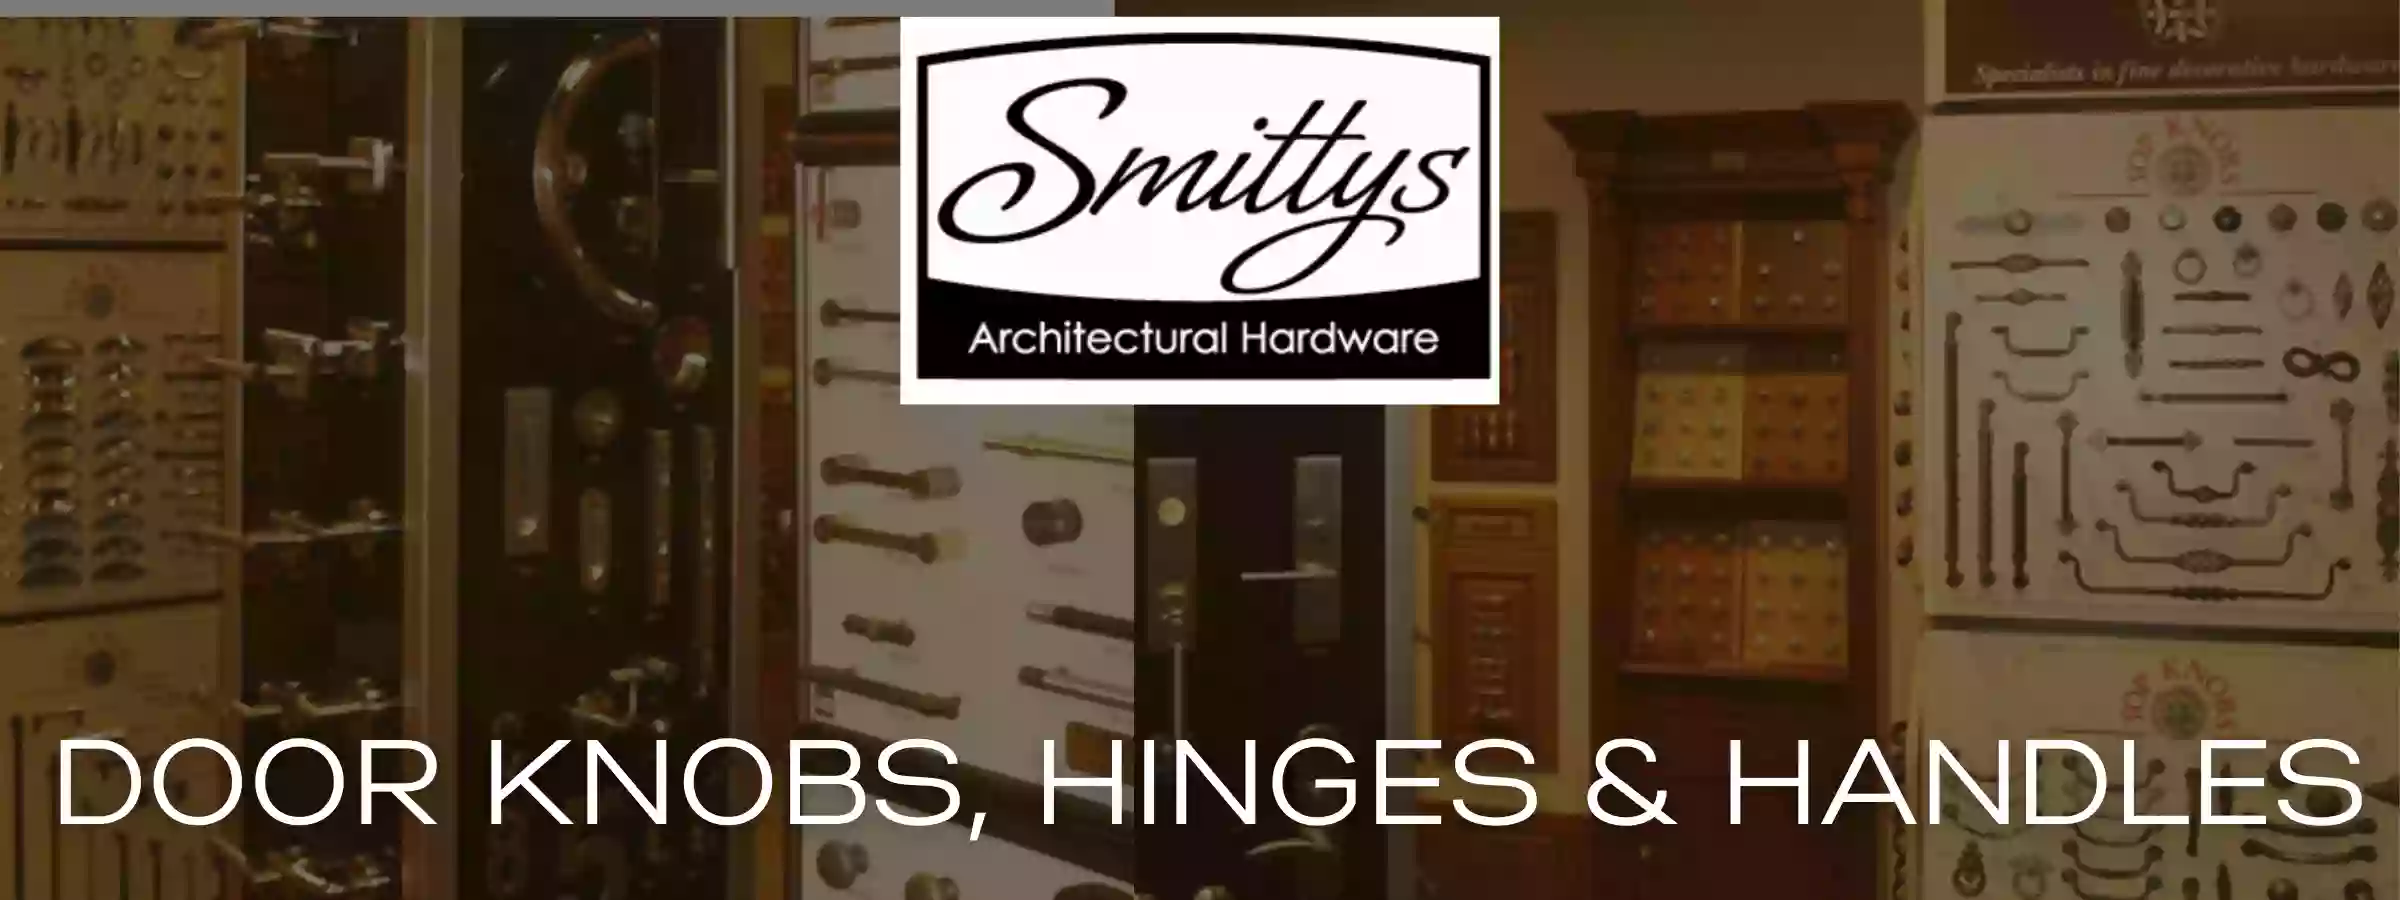 Smitty's Architectural Hardware